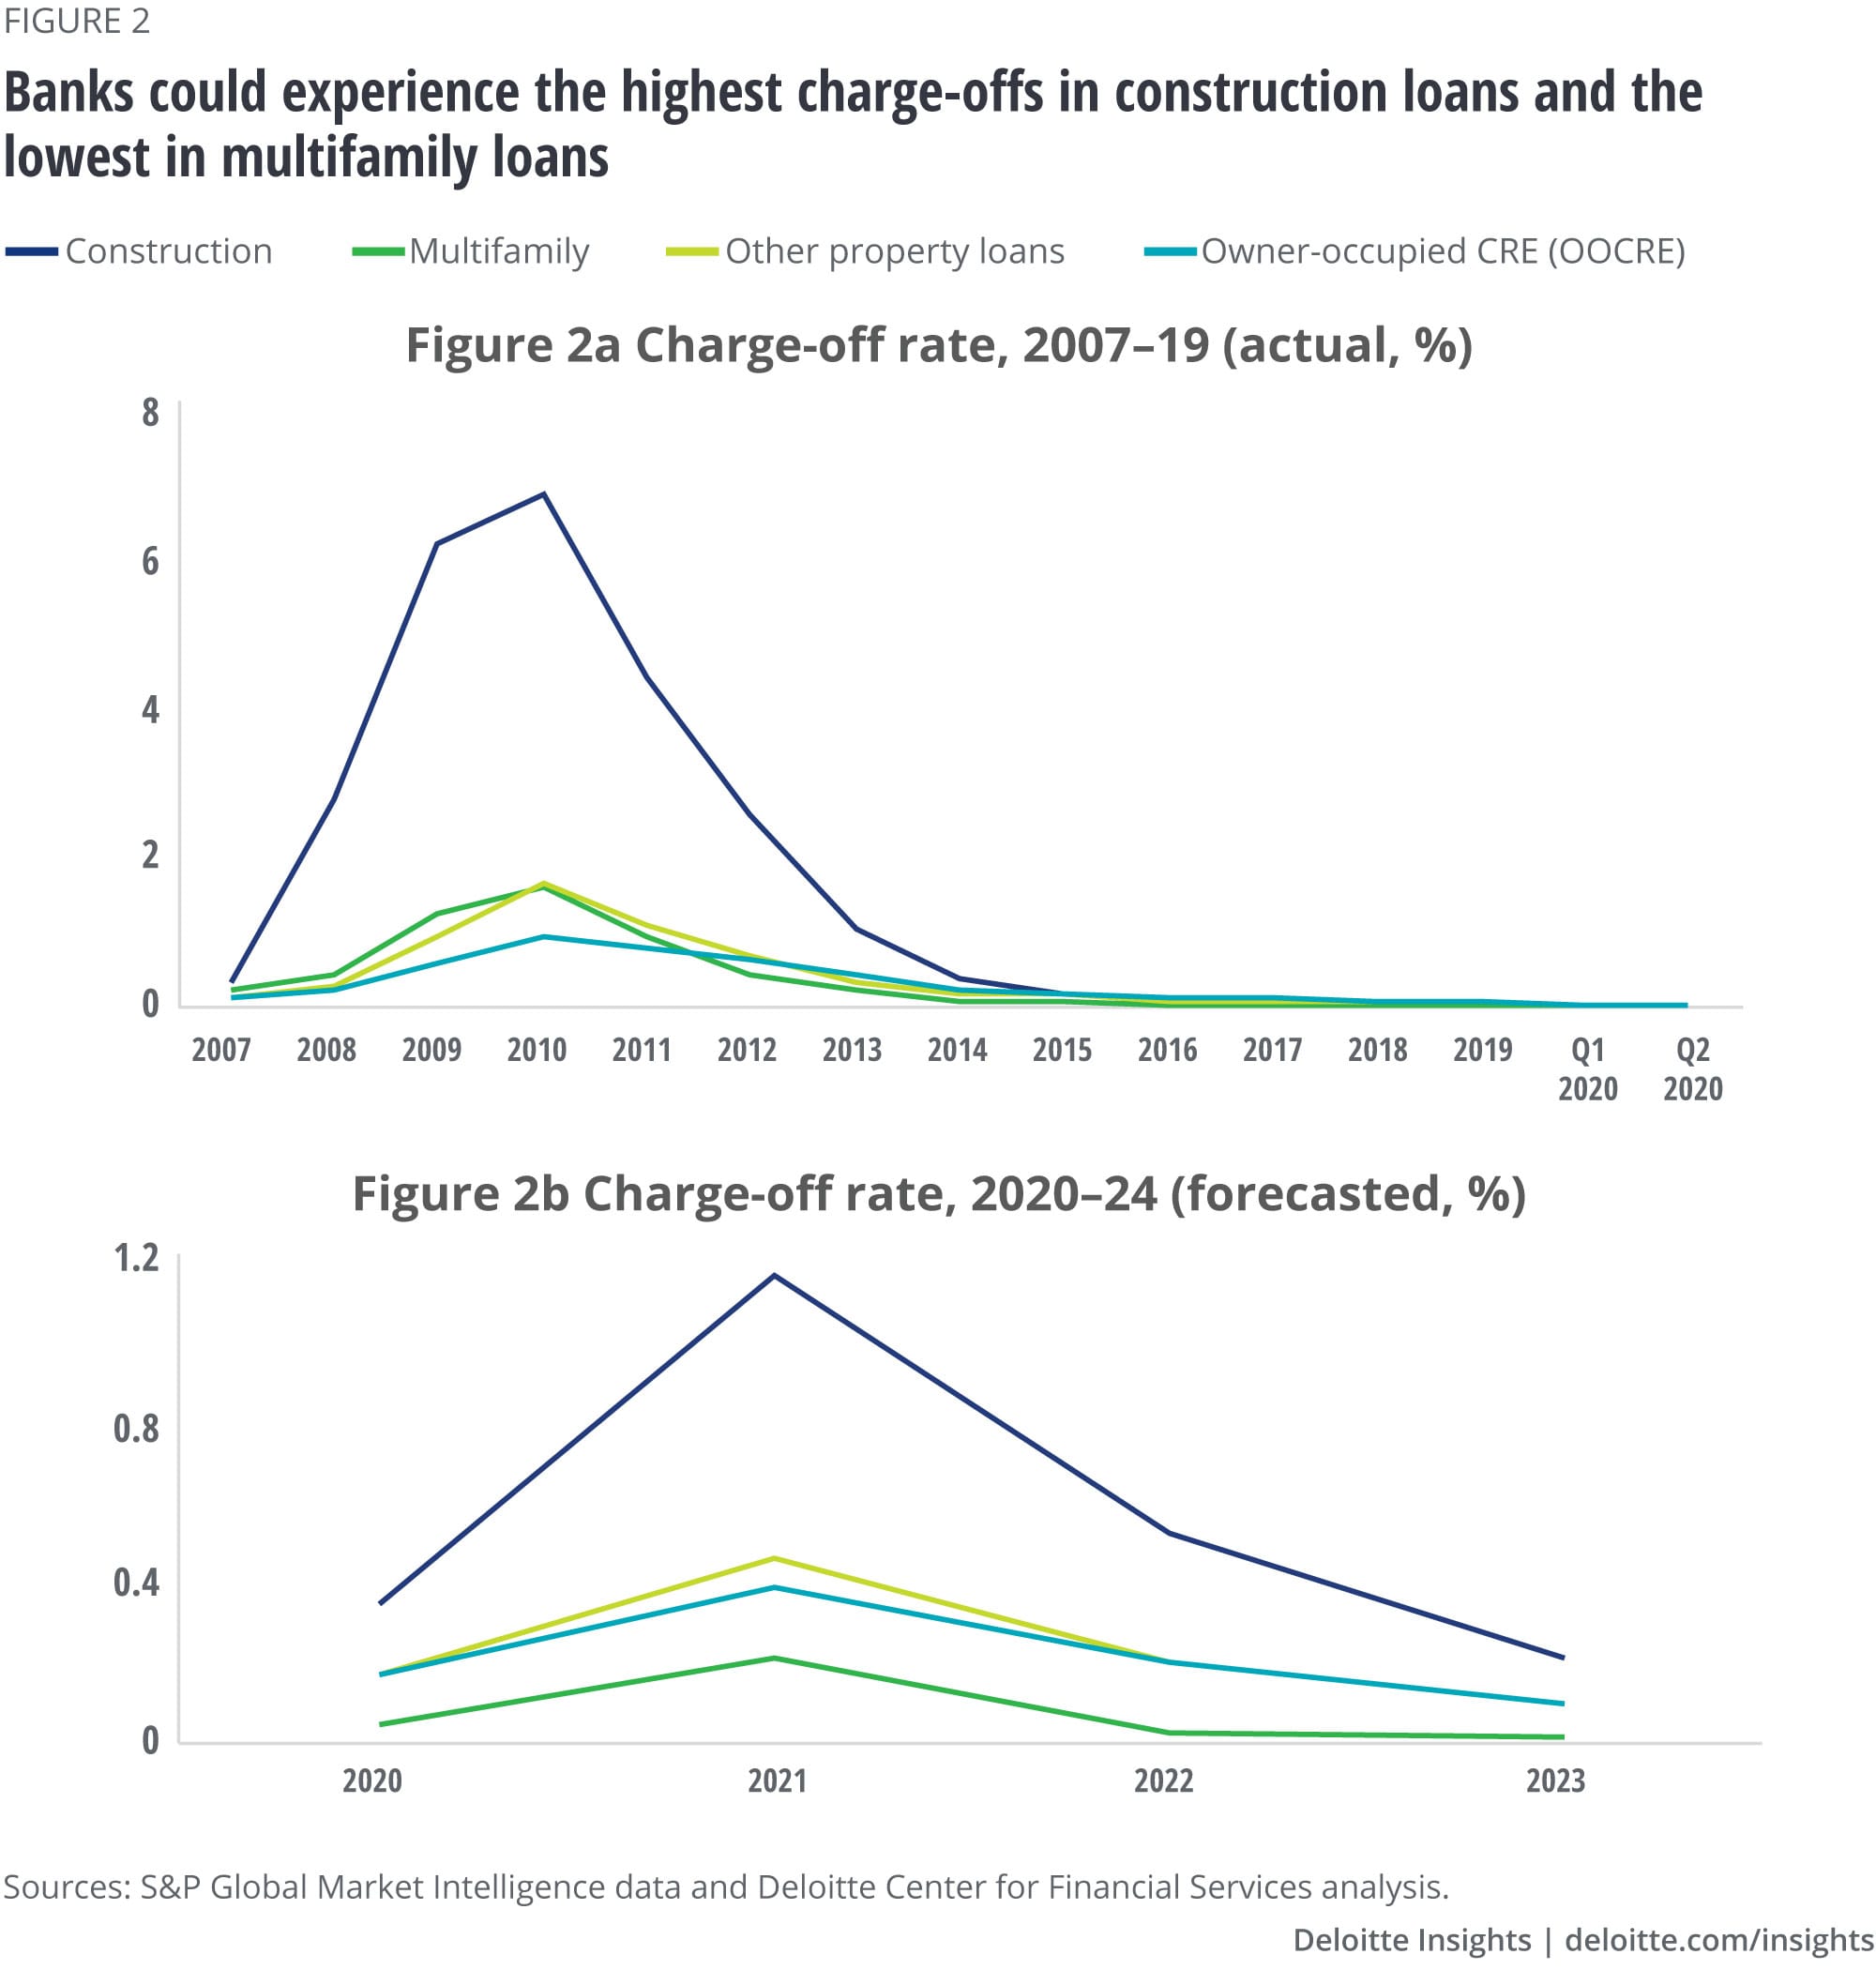 Banks could experience the highest charge-off rate in construction loans and the lowest in multifamily loans